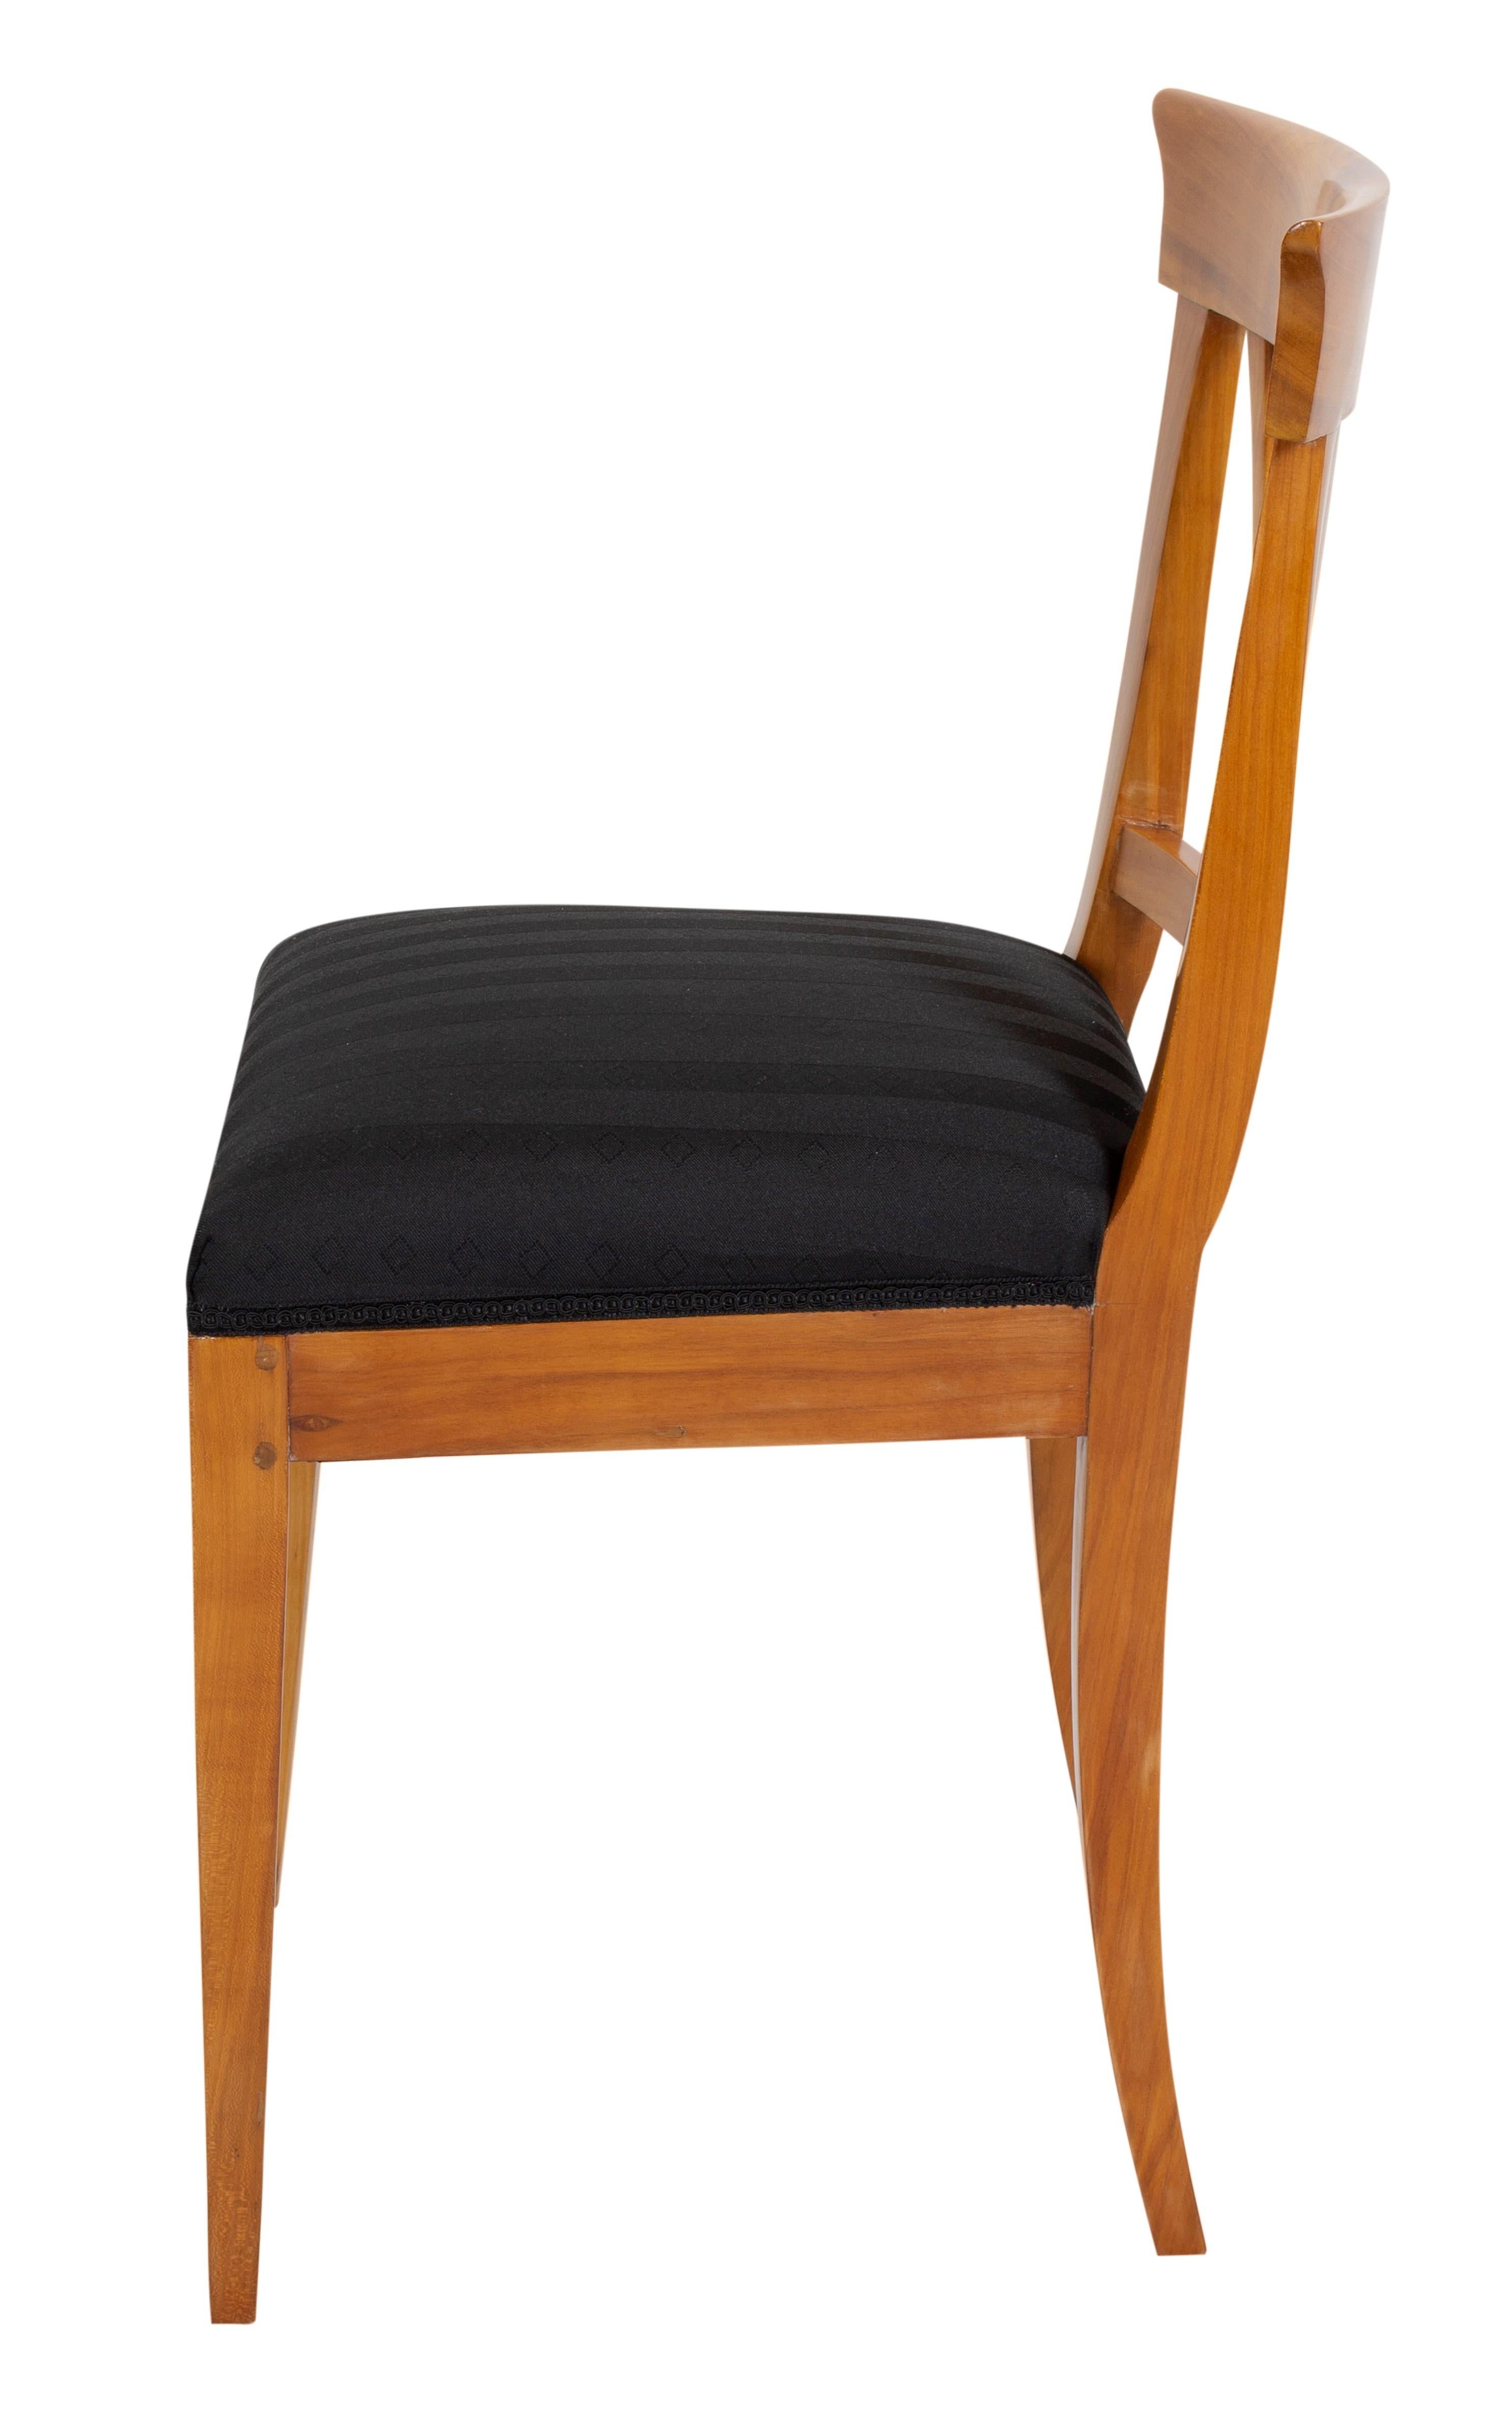 A chair from the time of the Biedermeier, circa 1830. The chair is made of solid cherrywood. The chair is newly upholstered with straps and springs and covered with new fabric.
In very good restored condition.